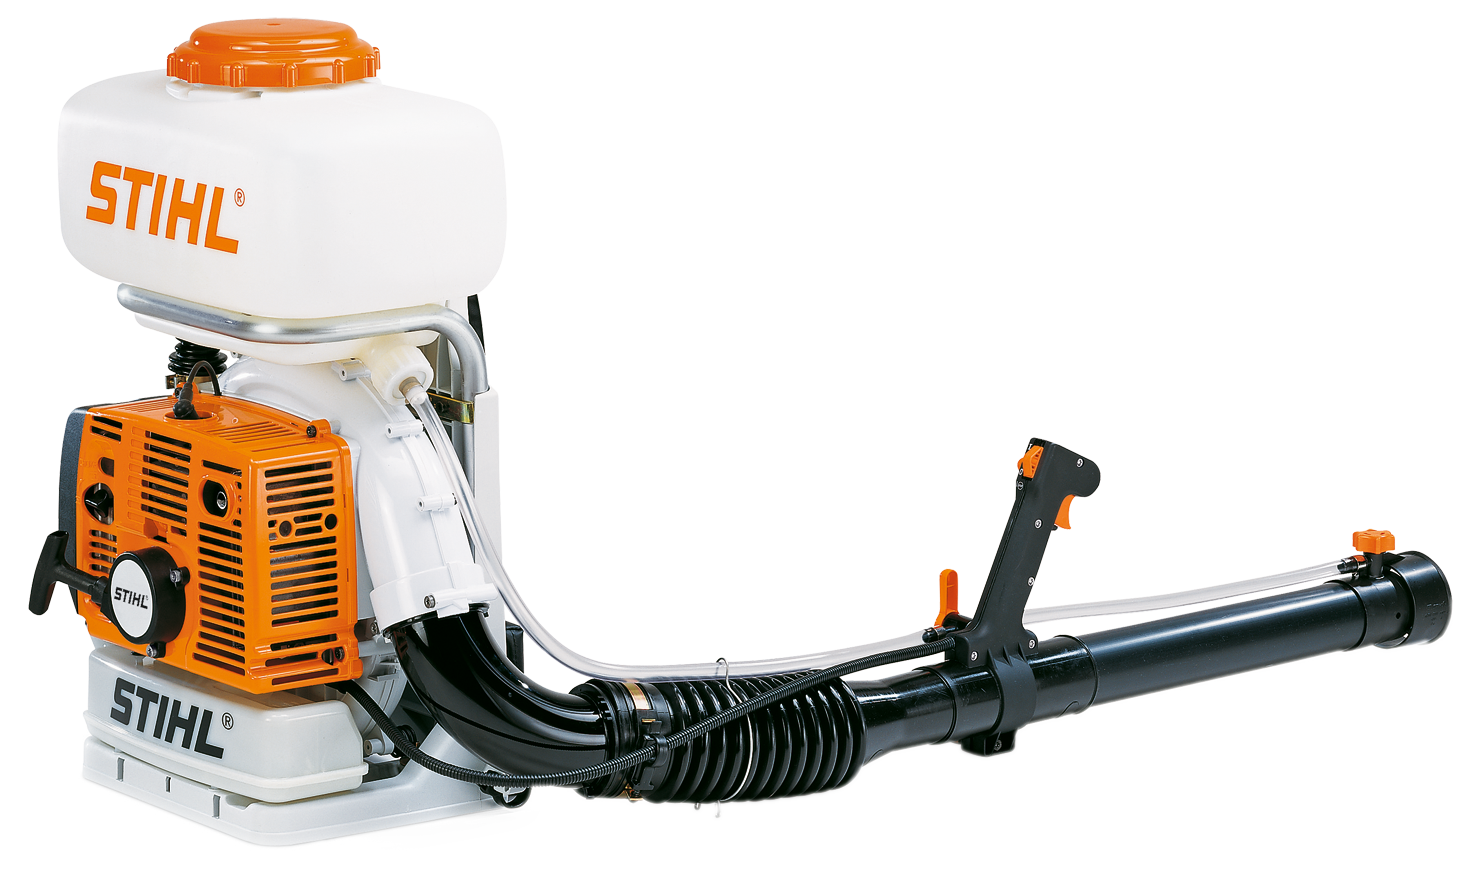 STIHL’s backpack mistblowers and Sprayers